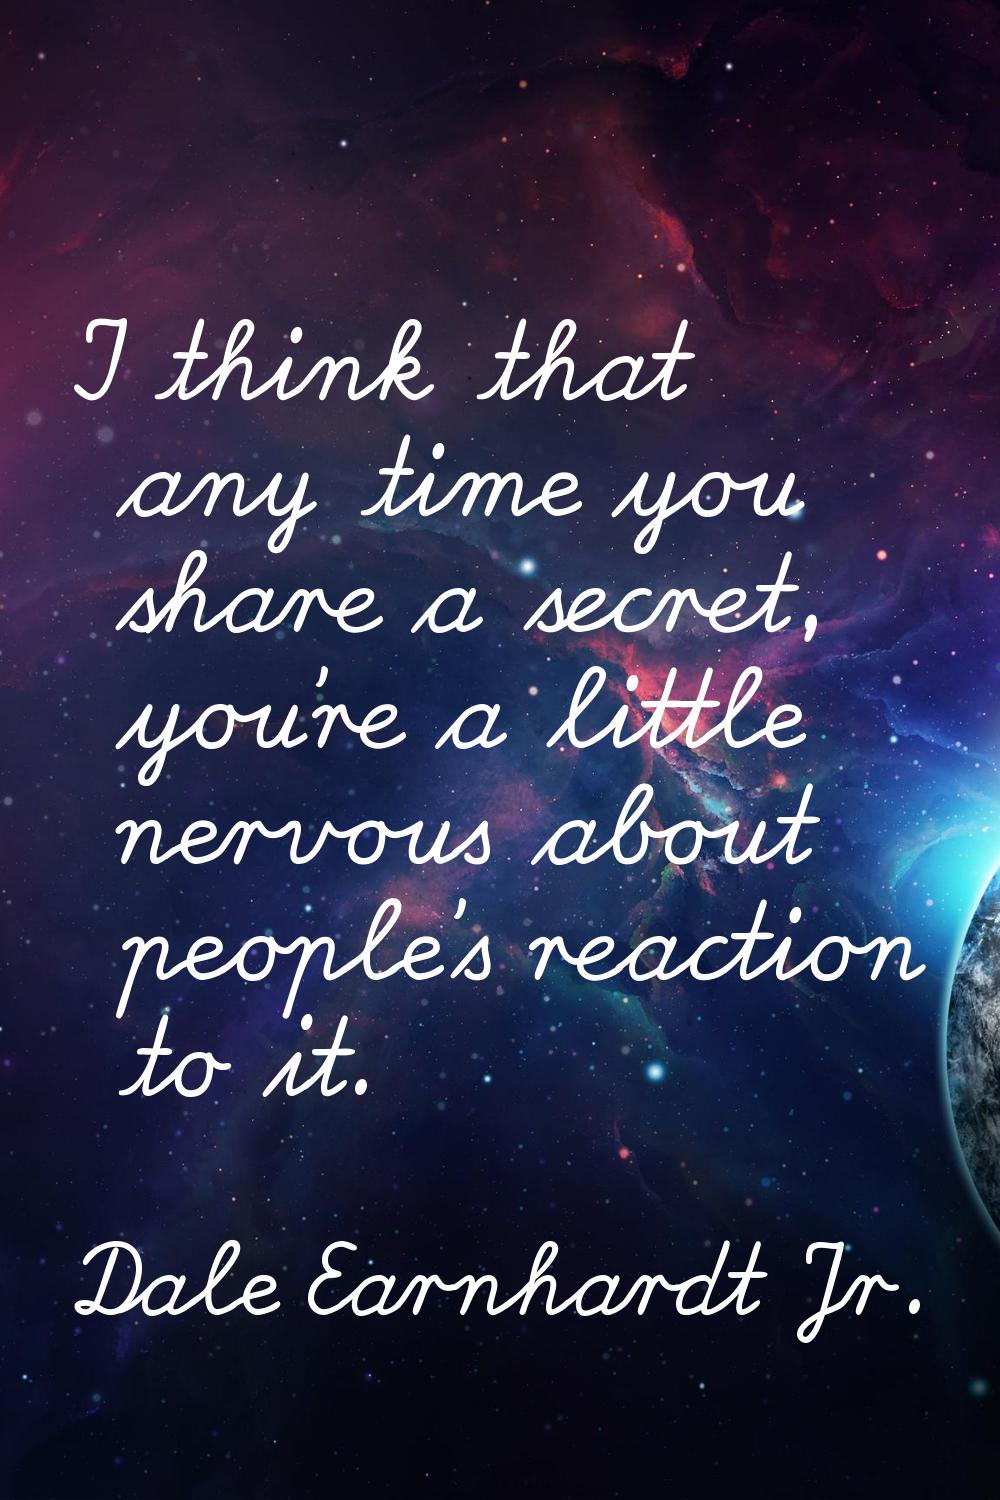 I think that any time you share a secret, you're a little nervous about people's reaction to it.